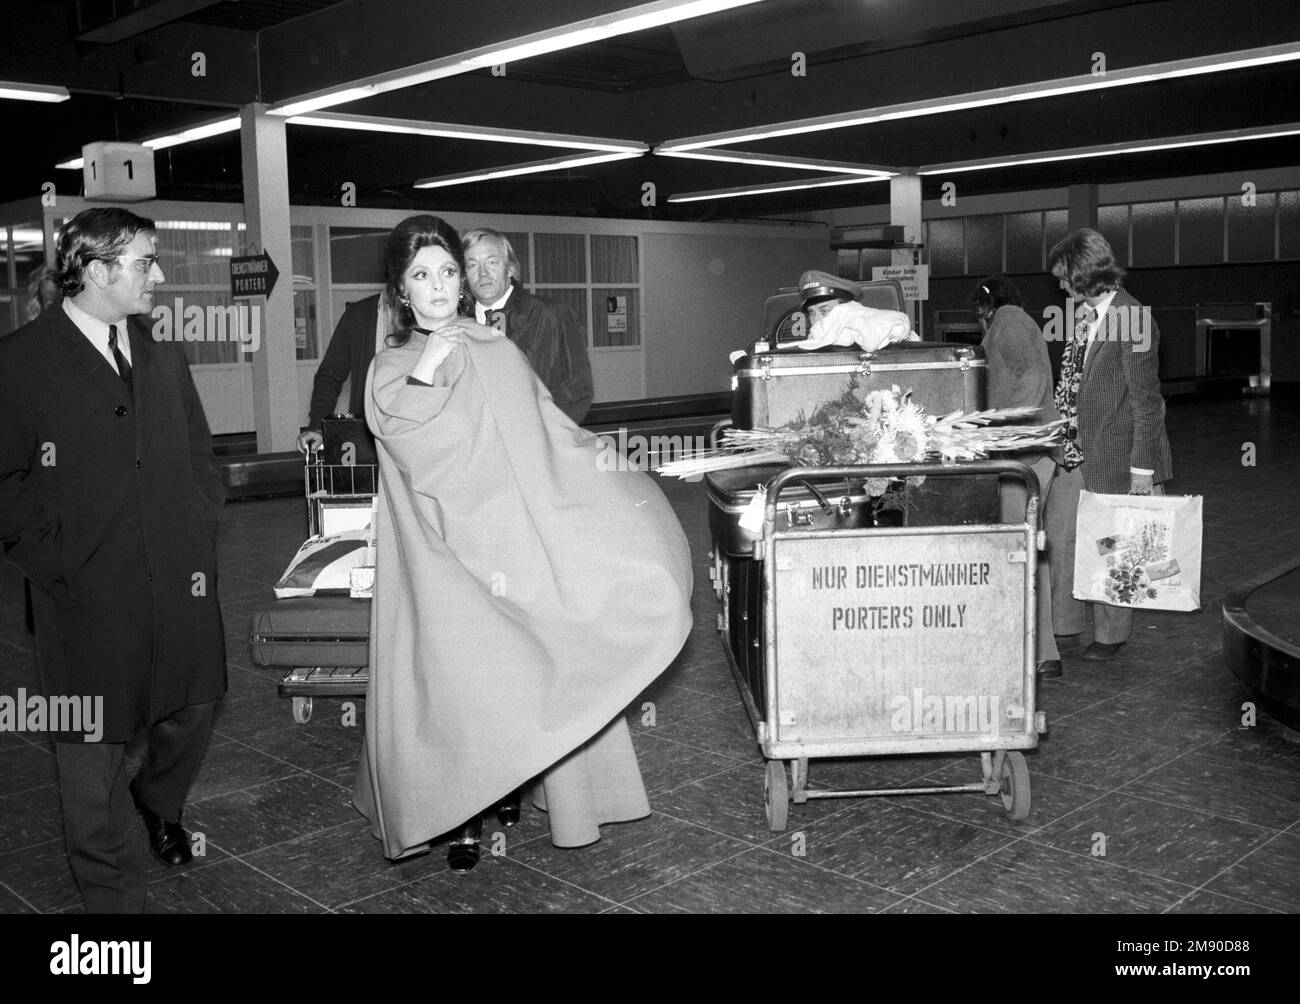 ARCHIVE PHOTO: Gina LOLLOBRIGIDA died at the age of 95, actress Gina LOLLOBRIGIDA, Italy, upon her arrival at the airport in Munich-Riem on October 10, 1971., wrapped in a cape, a porter transported her suitcases on a trolley, luggage trolley, B&W recording, 10/10/1971. ? Stock Photo